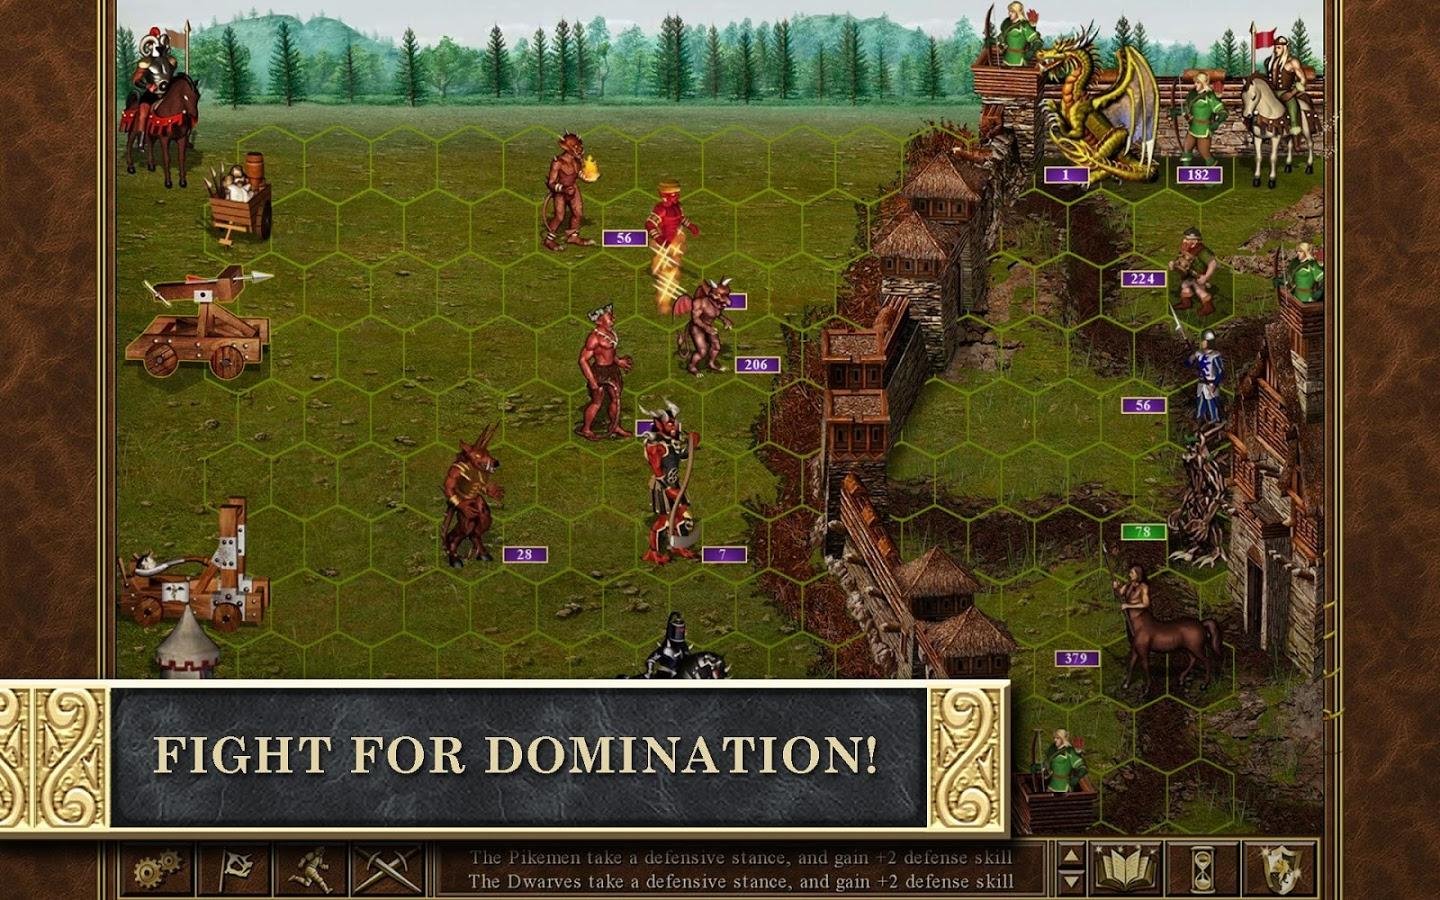 Download Heroes of Might & Magic III v20.20.20 APK free für Android